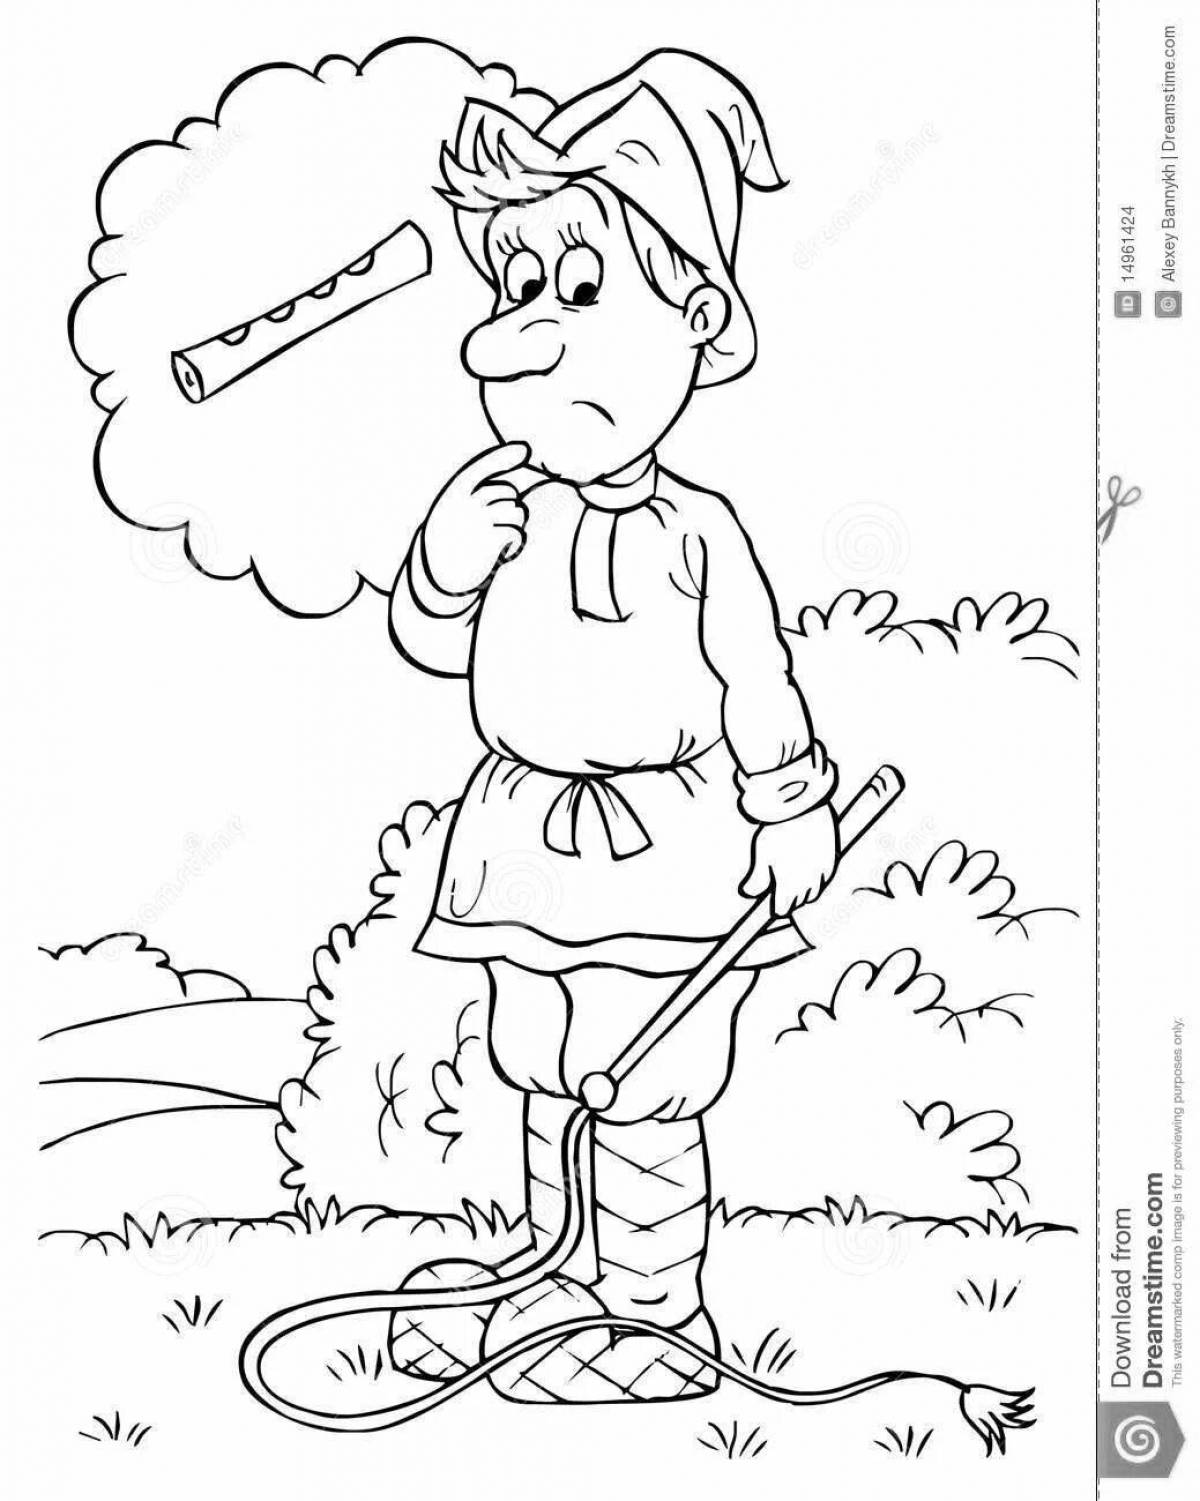 Animated shepherd coloring page